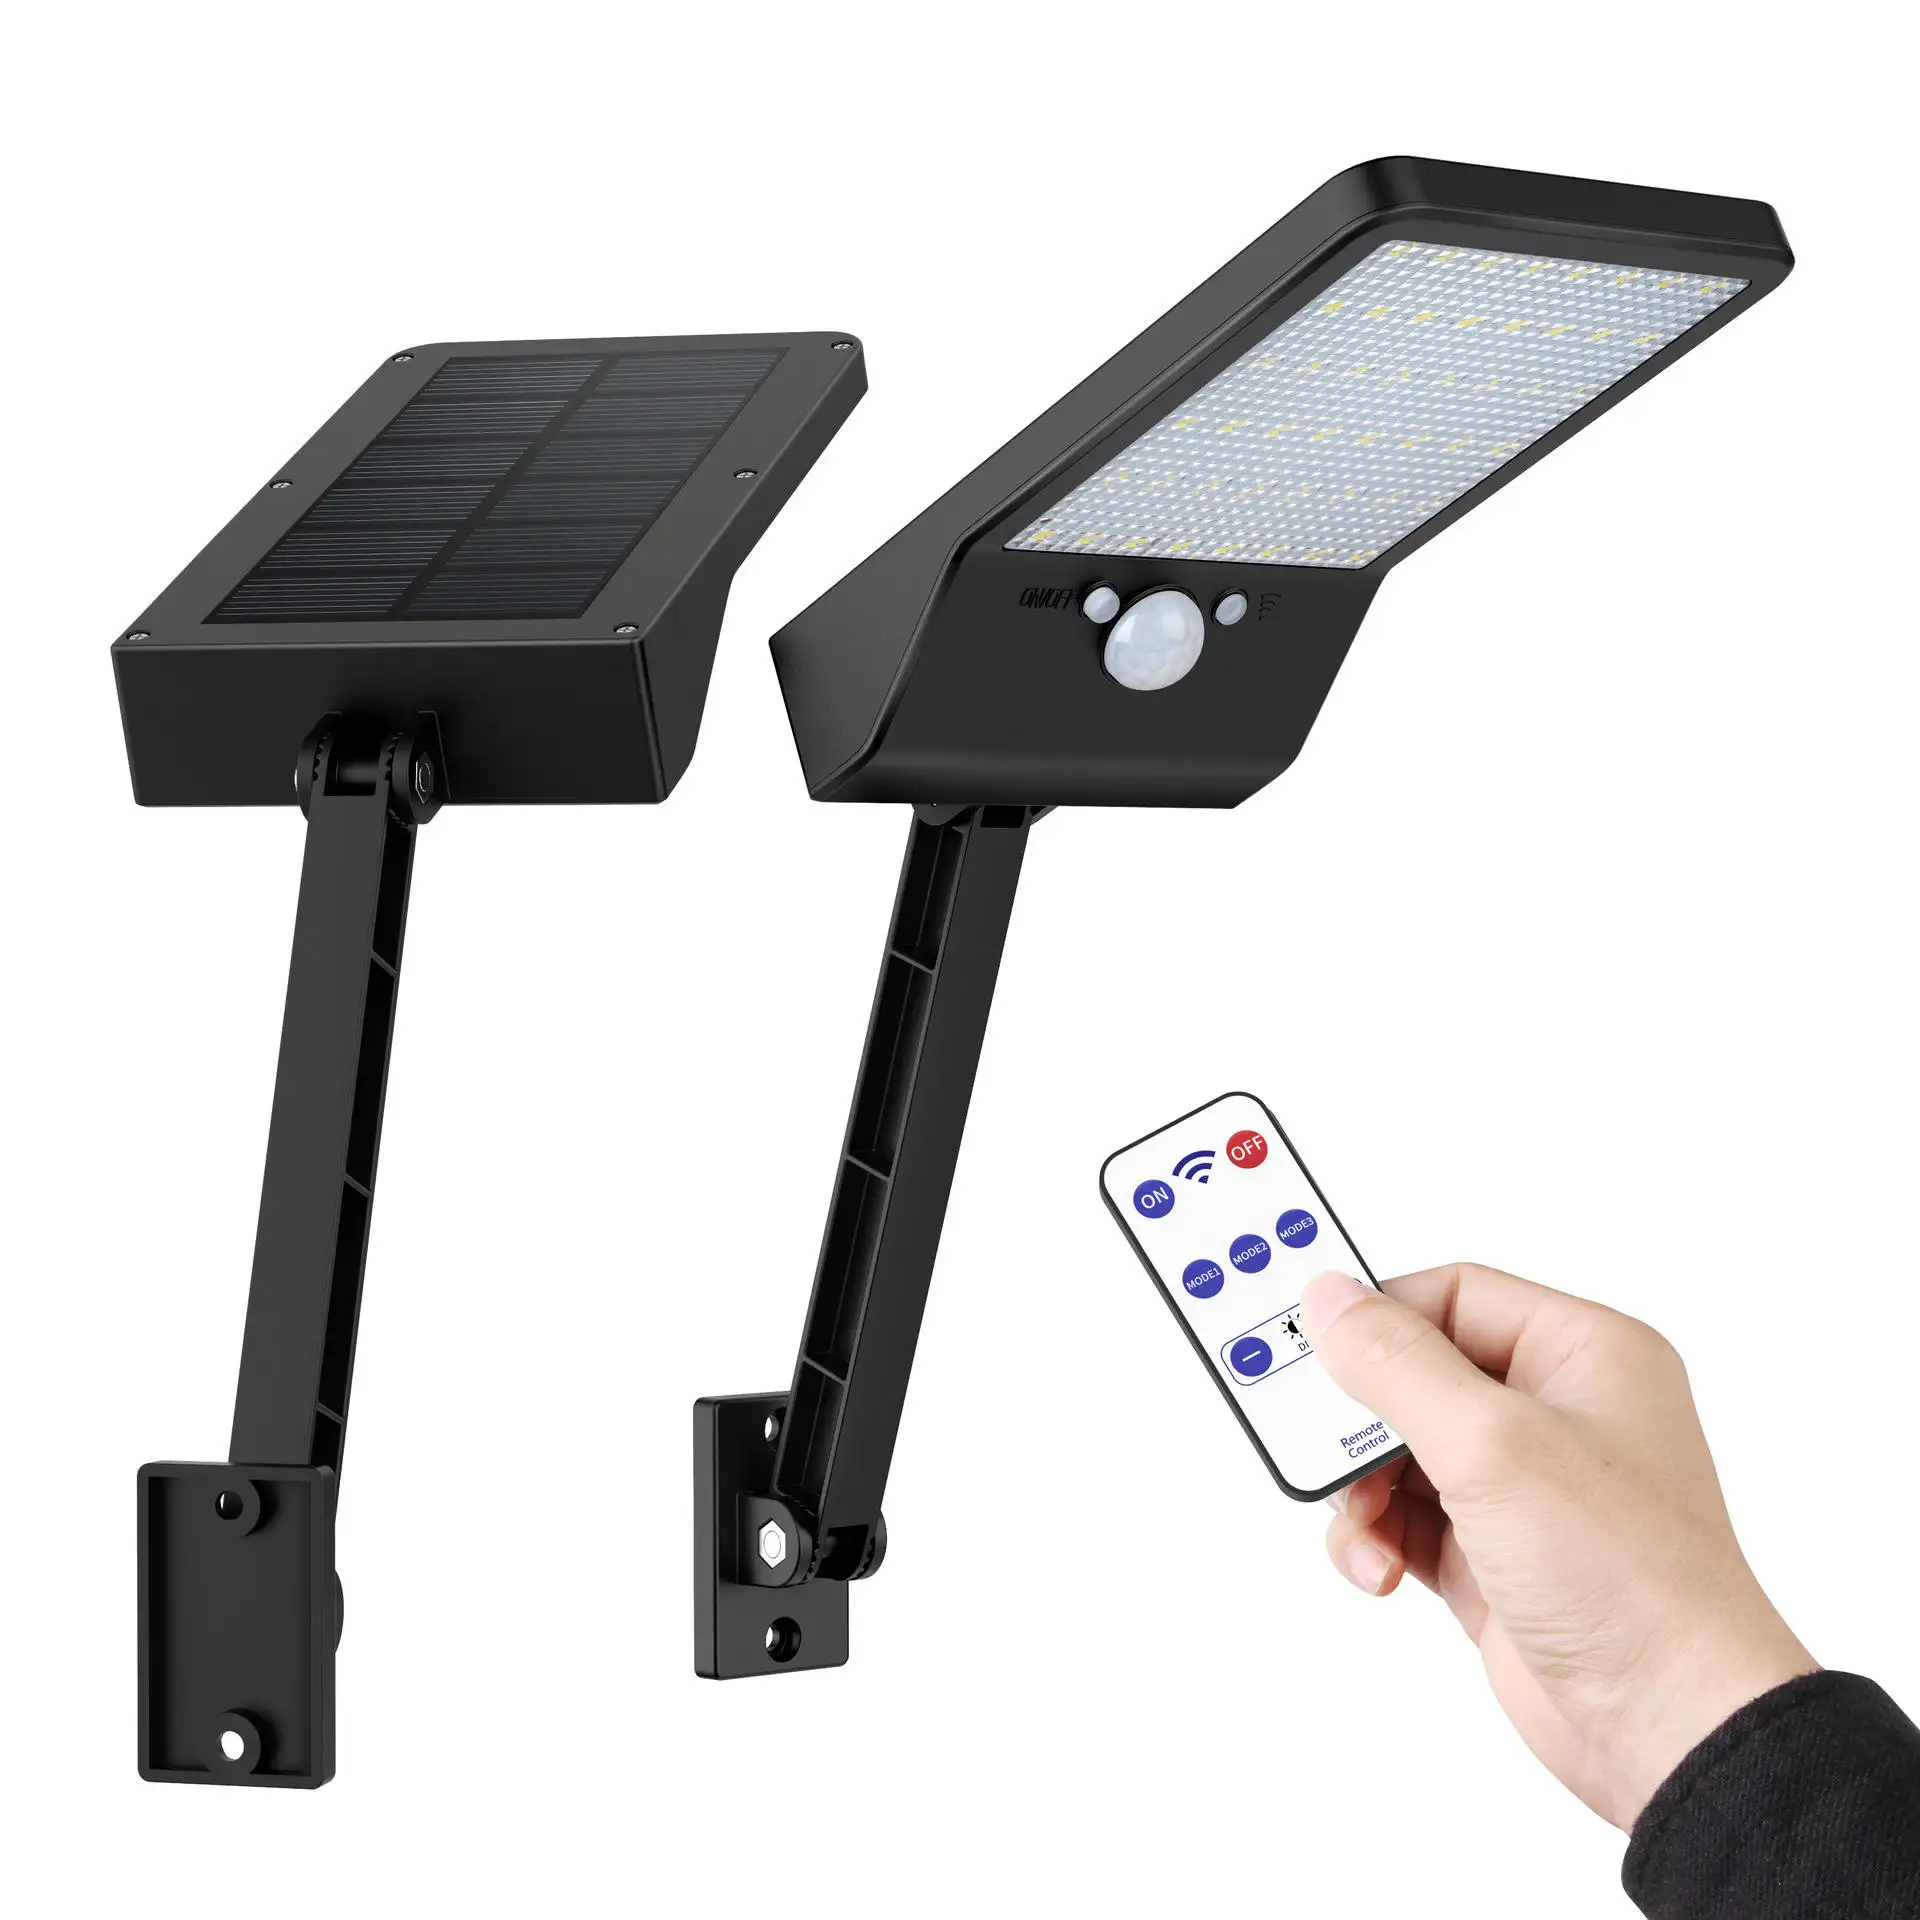 Intelligent outdoor lights powered by solar panels for remote lighting ip67 Lamparas Luces  LED lights